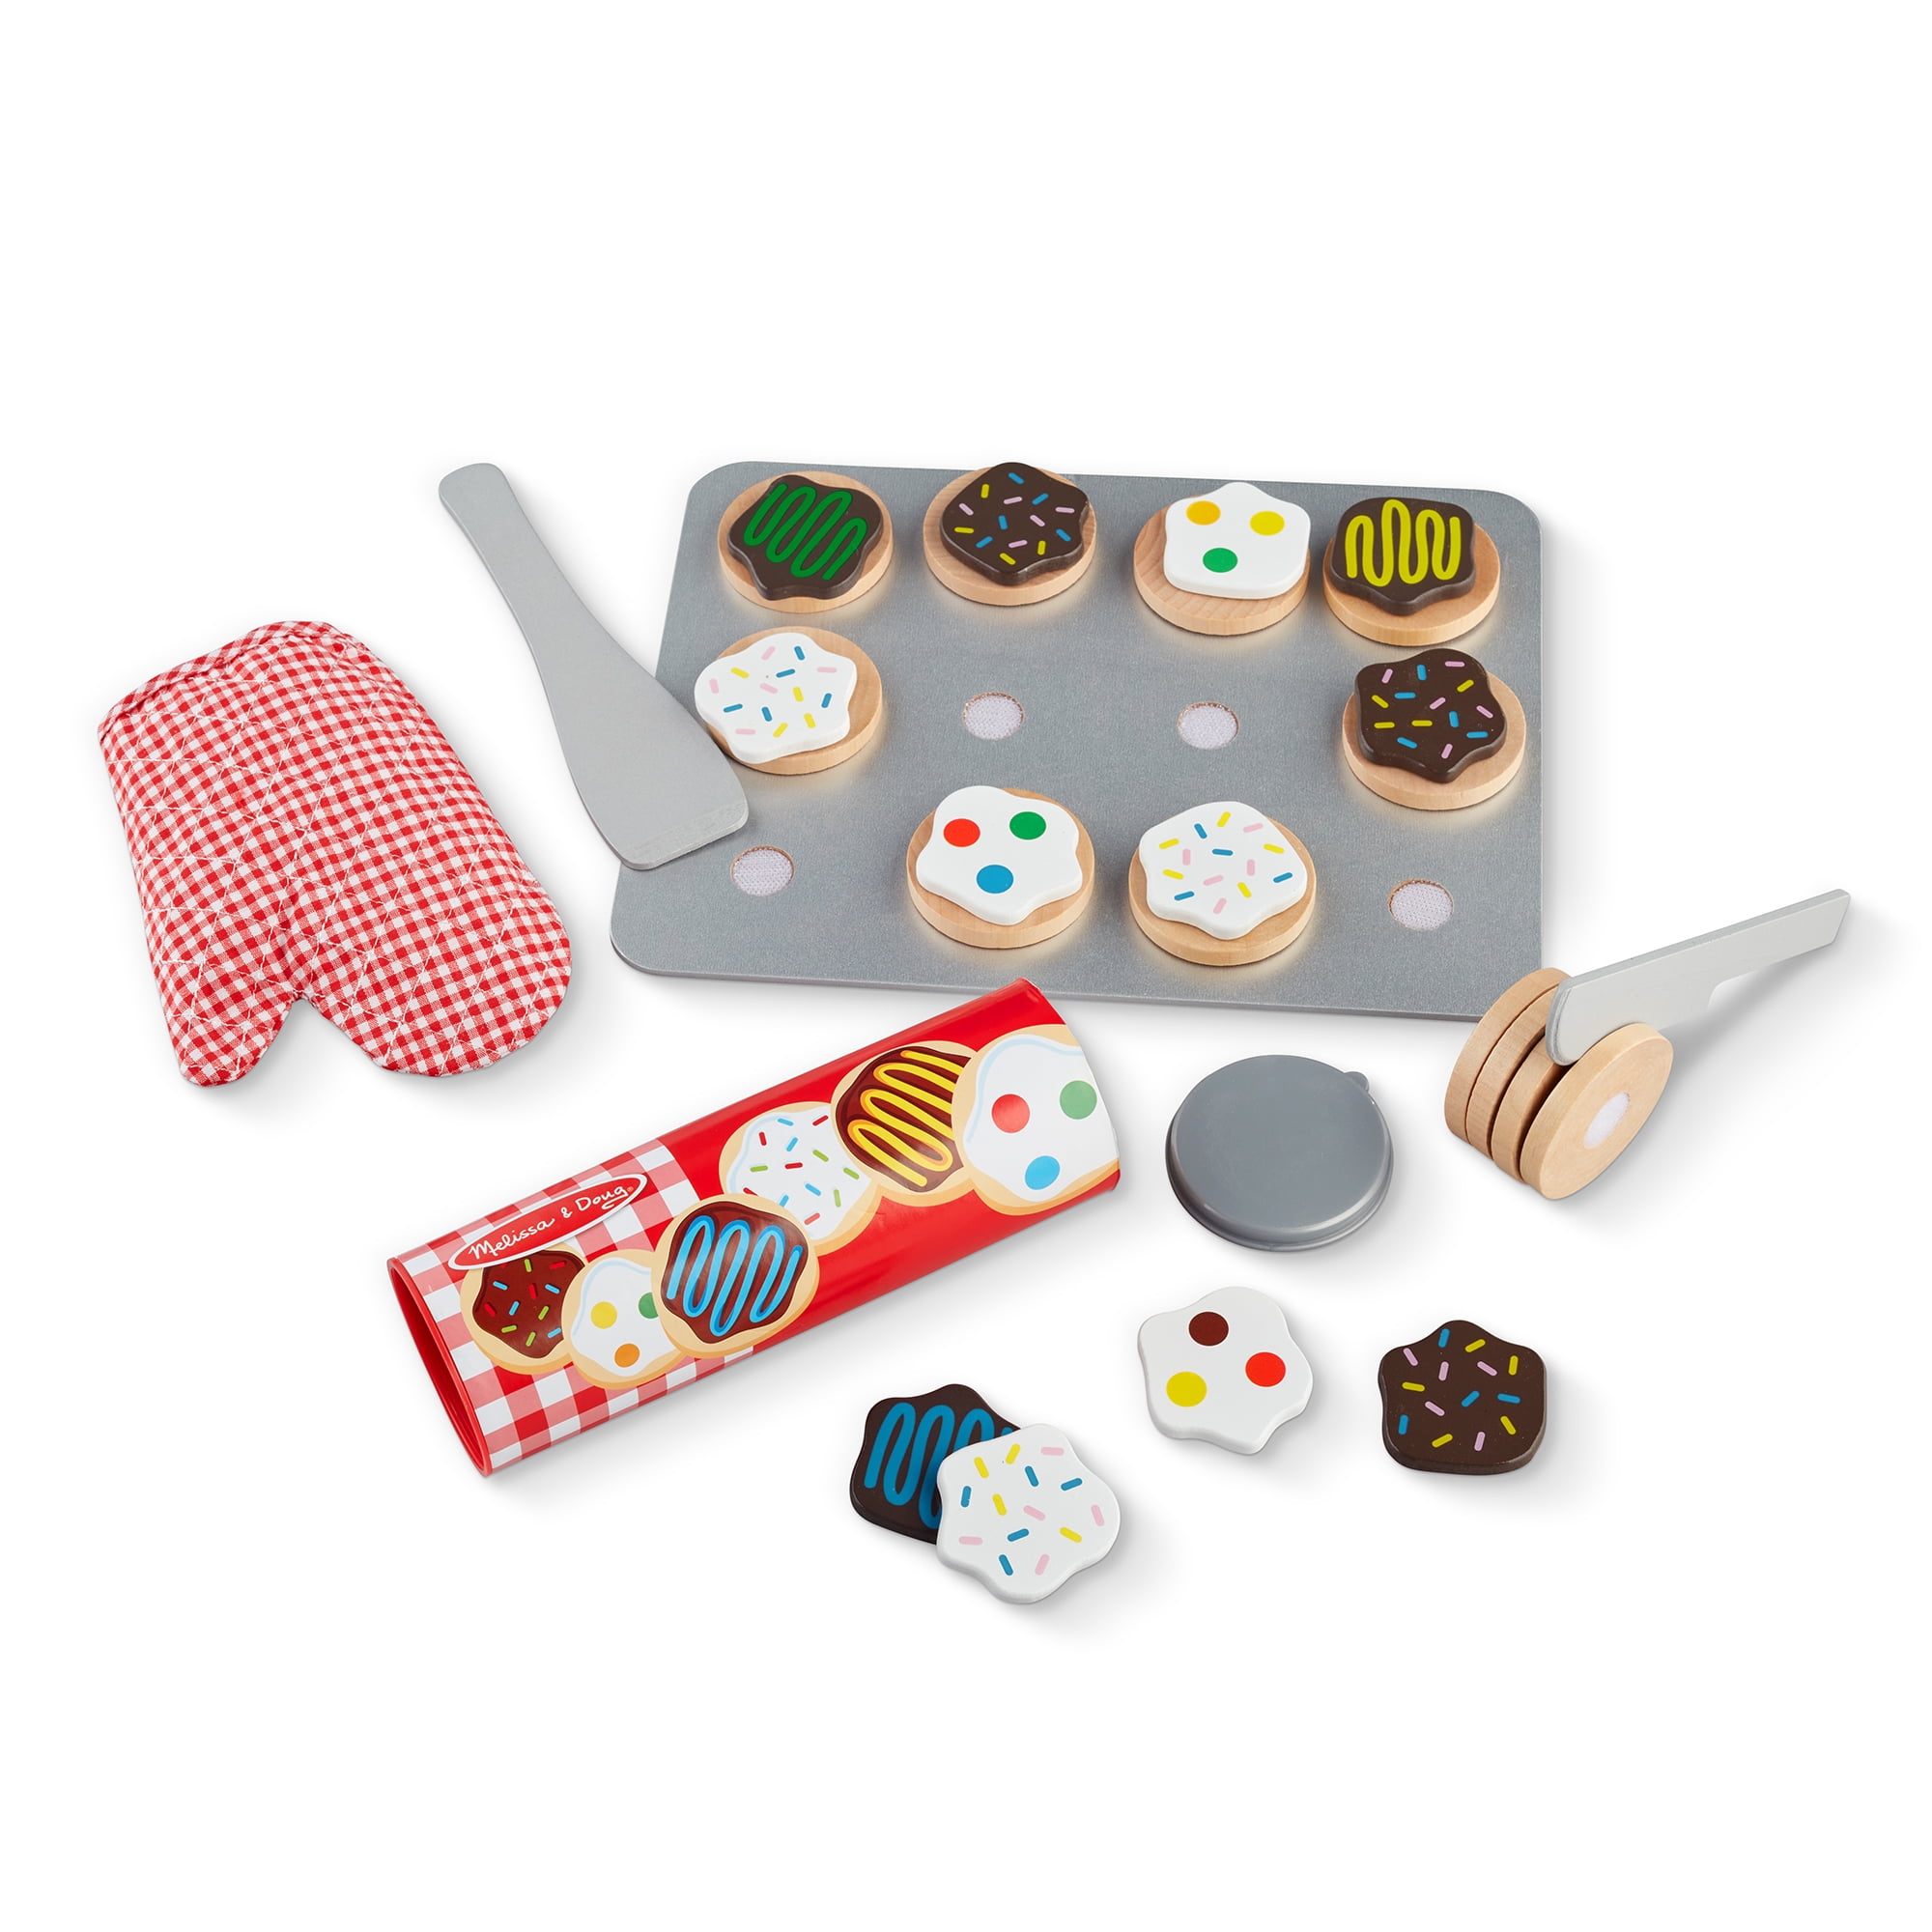 KITCHEN PLAY FOOD SET Lot Dishes Group Wooden Toy Preschool Pretend Role Game 